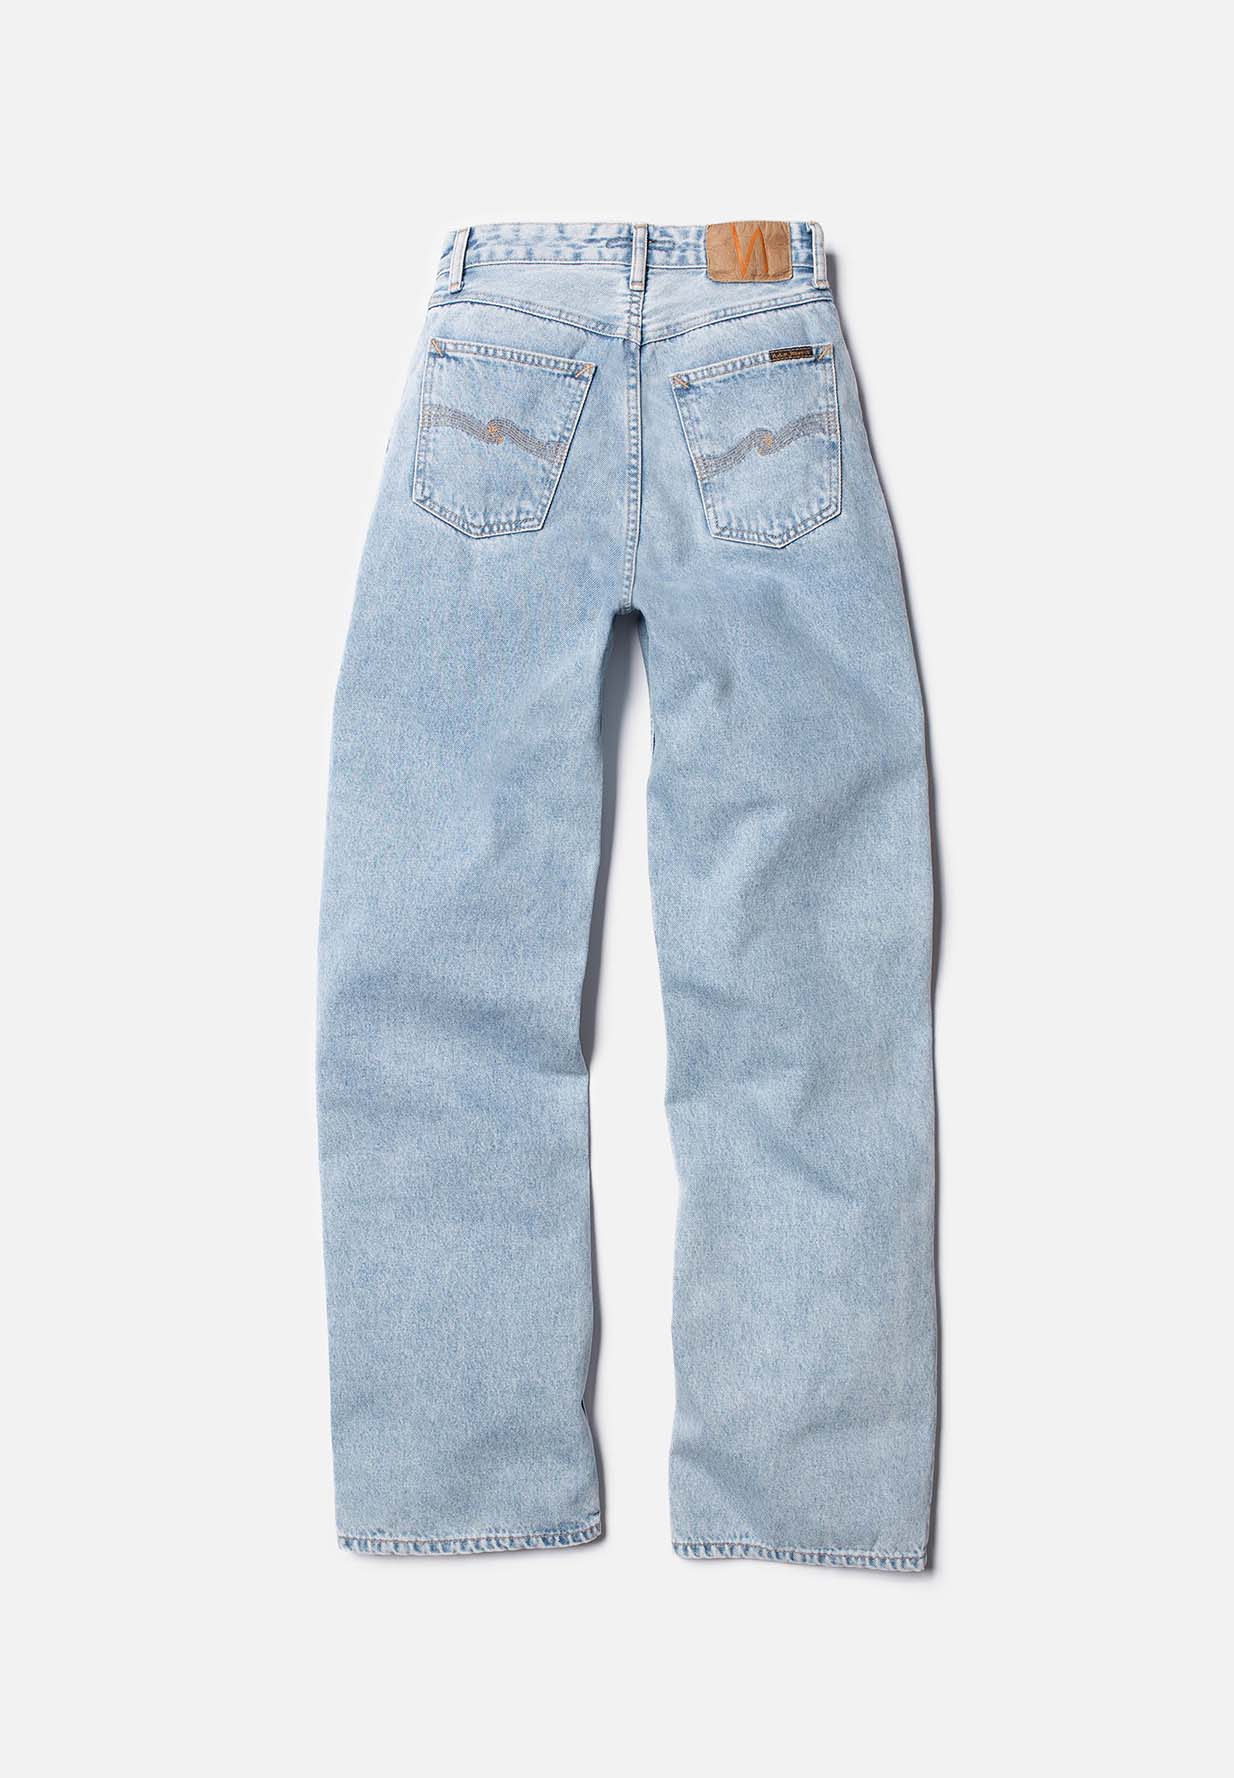 NUDIE JEANS Jeans Clean Eileen sunny blue 32/30